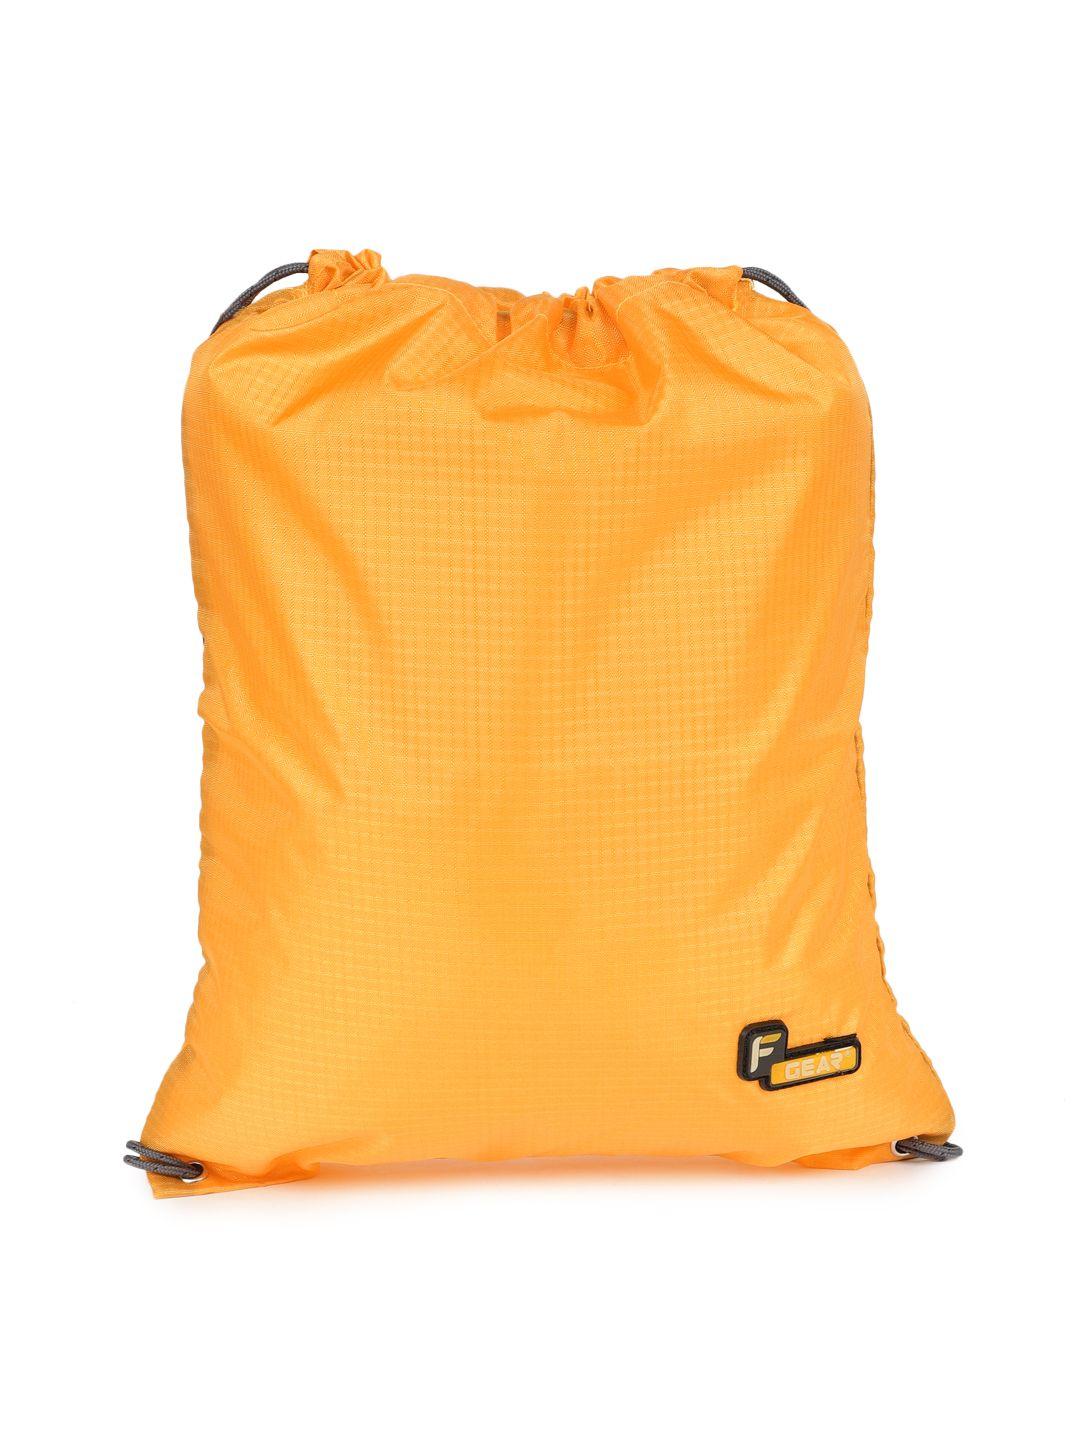 f gear unisex yellow string backpack